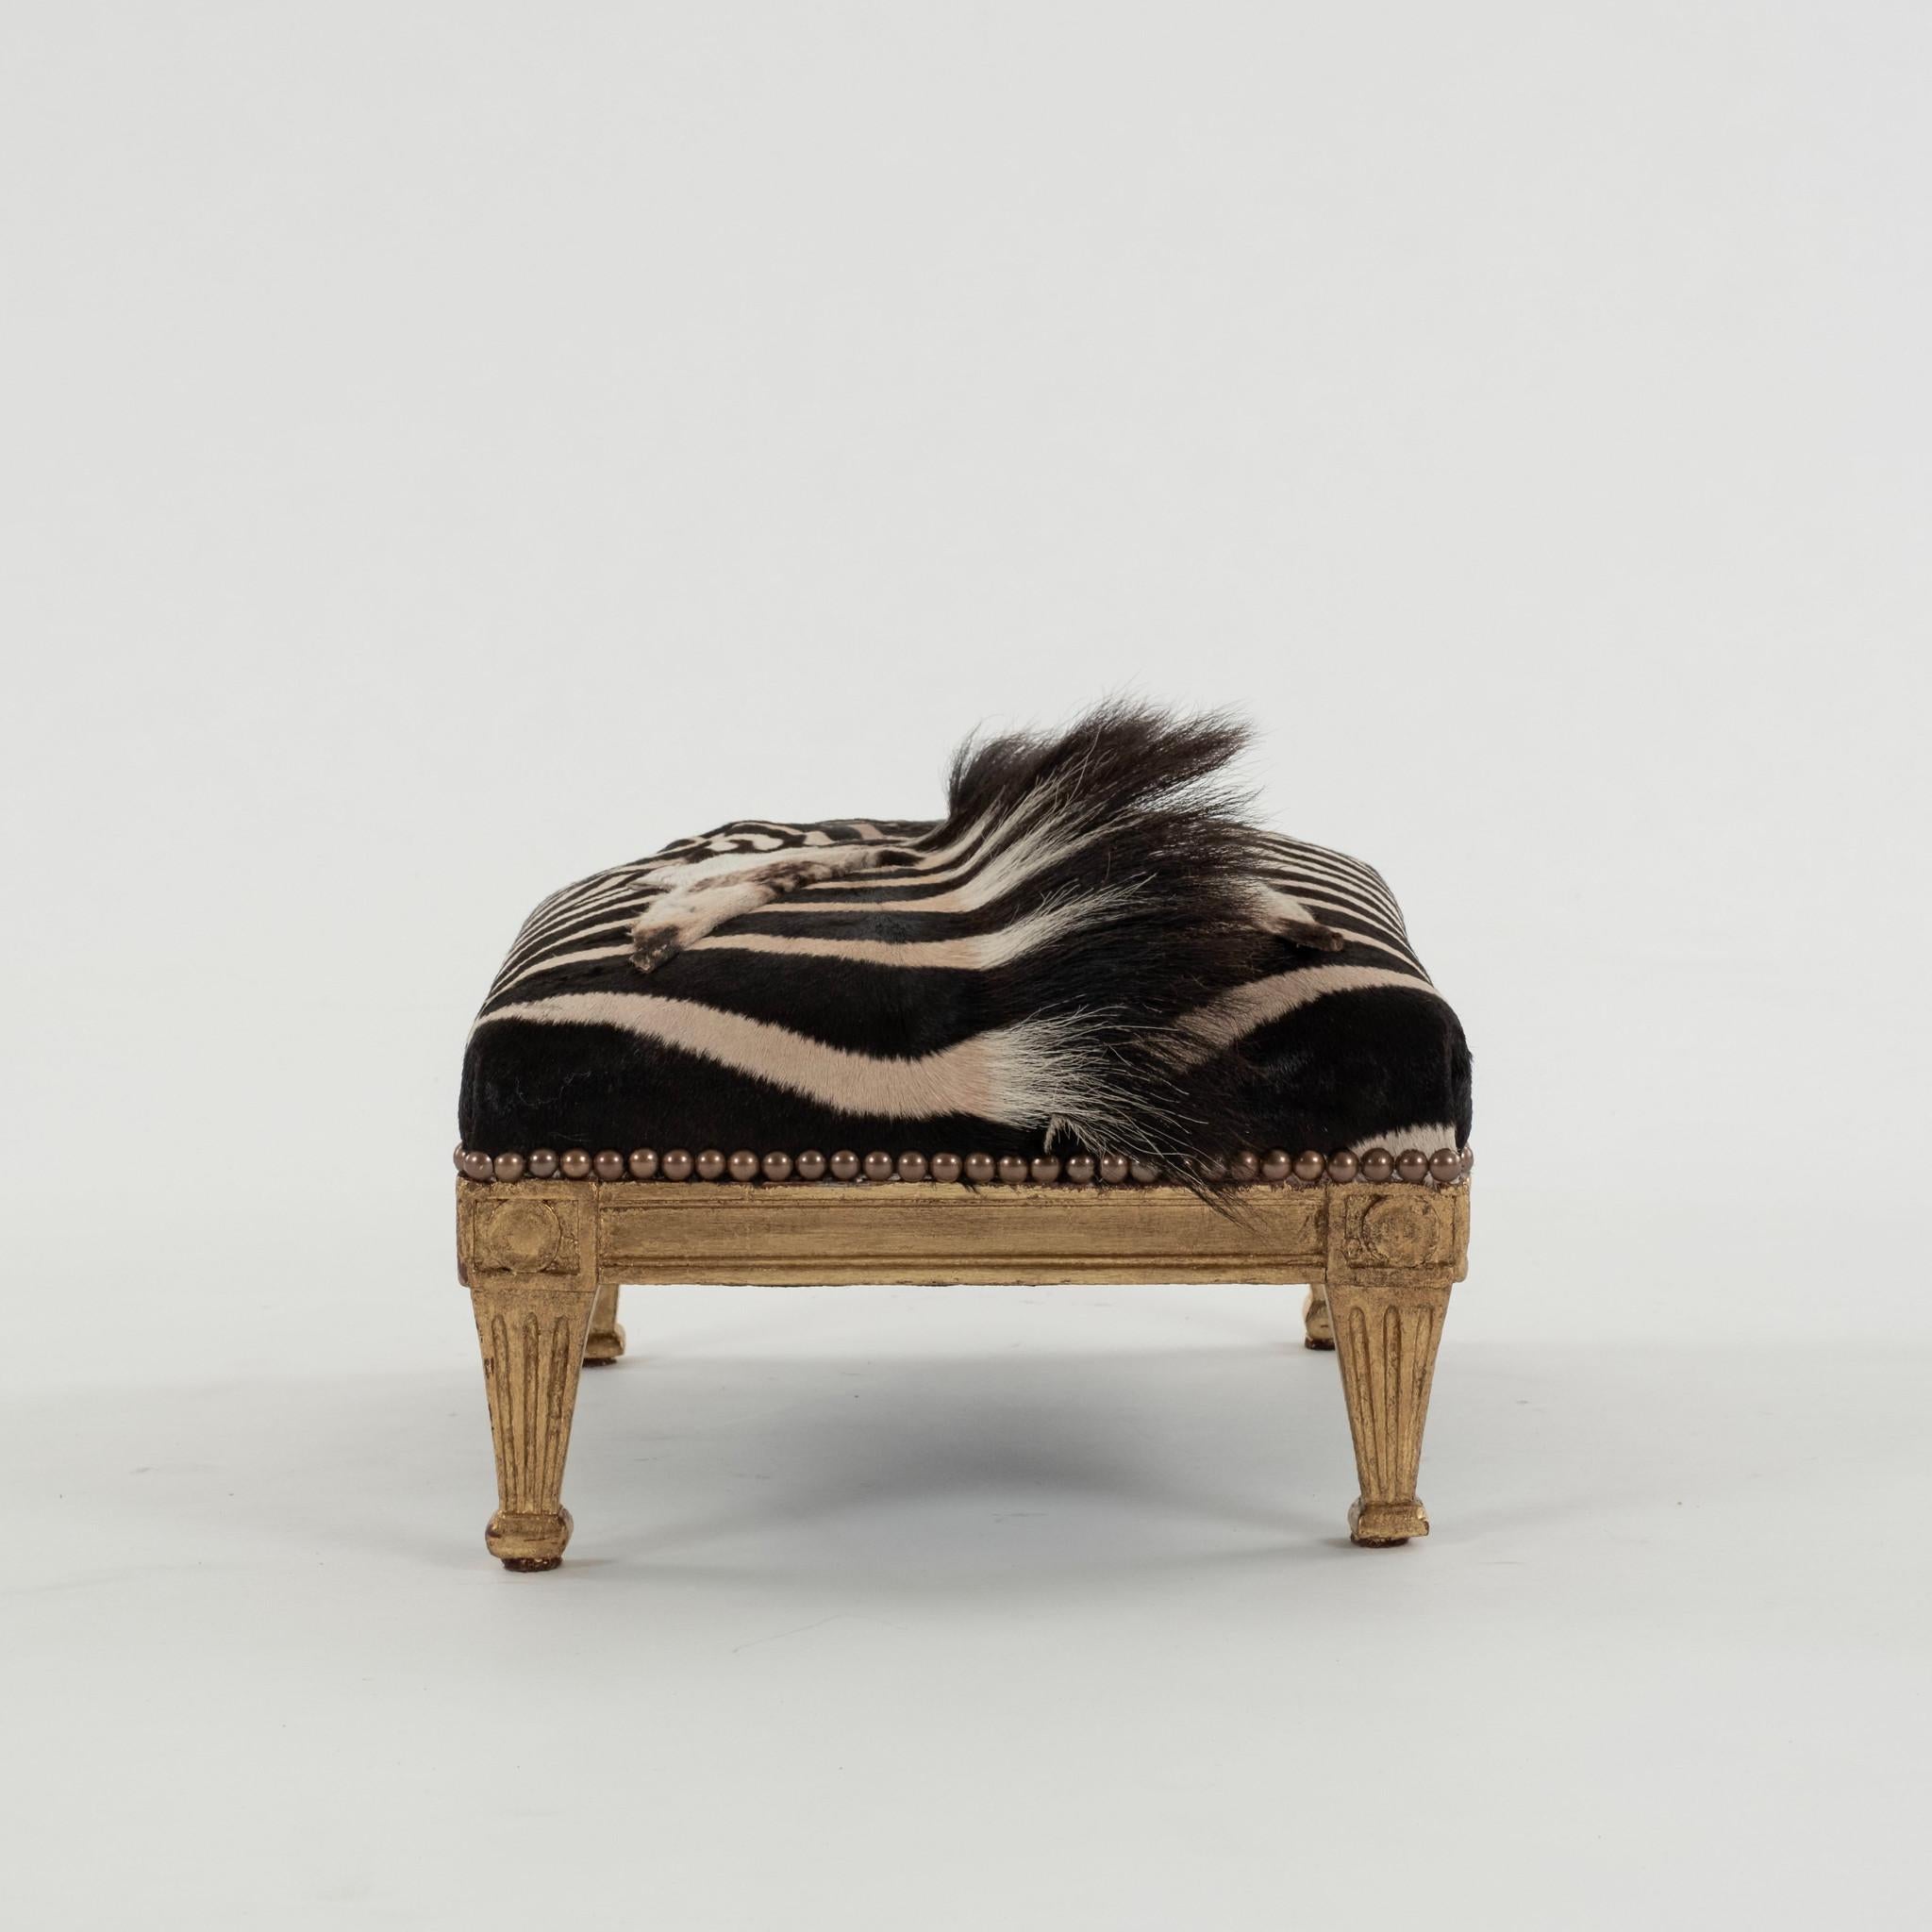 1920s or earlier French Directoire giltwood footstool upholstered zebra hide with nailhead detail.